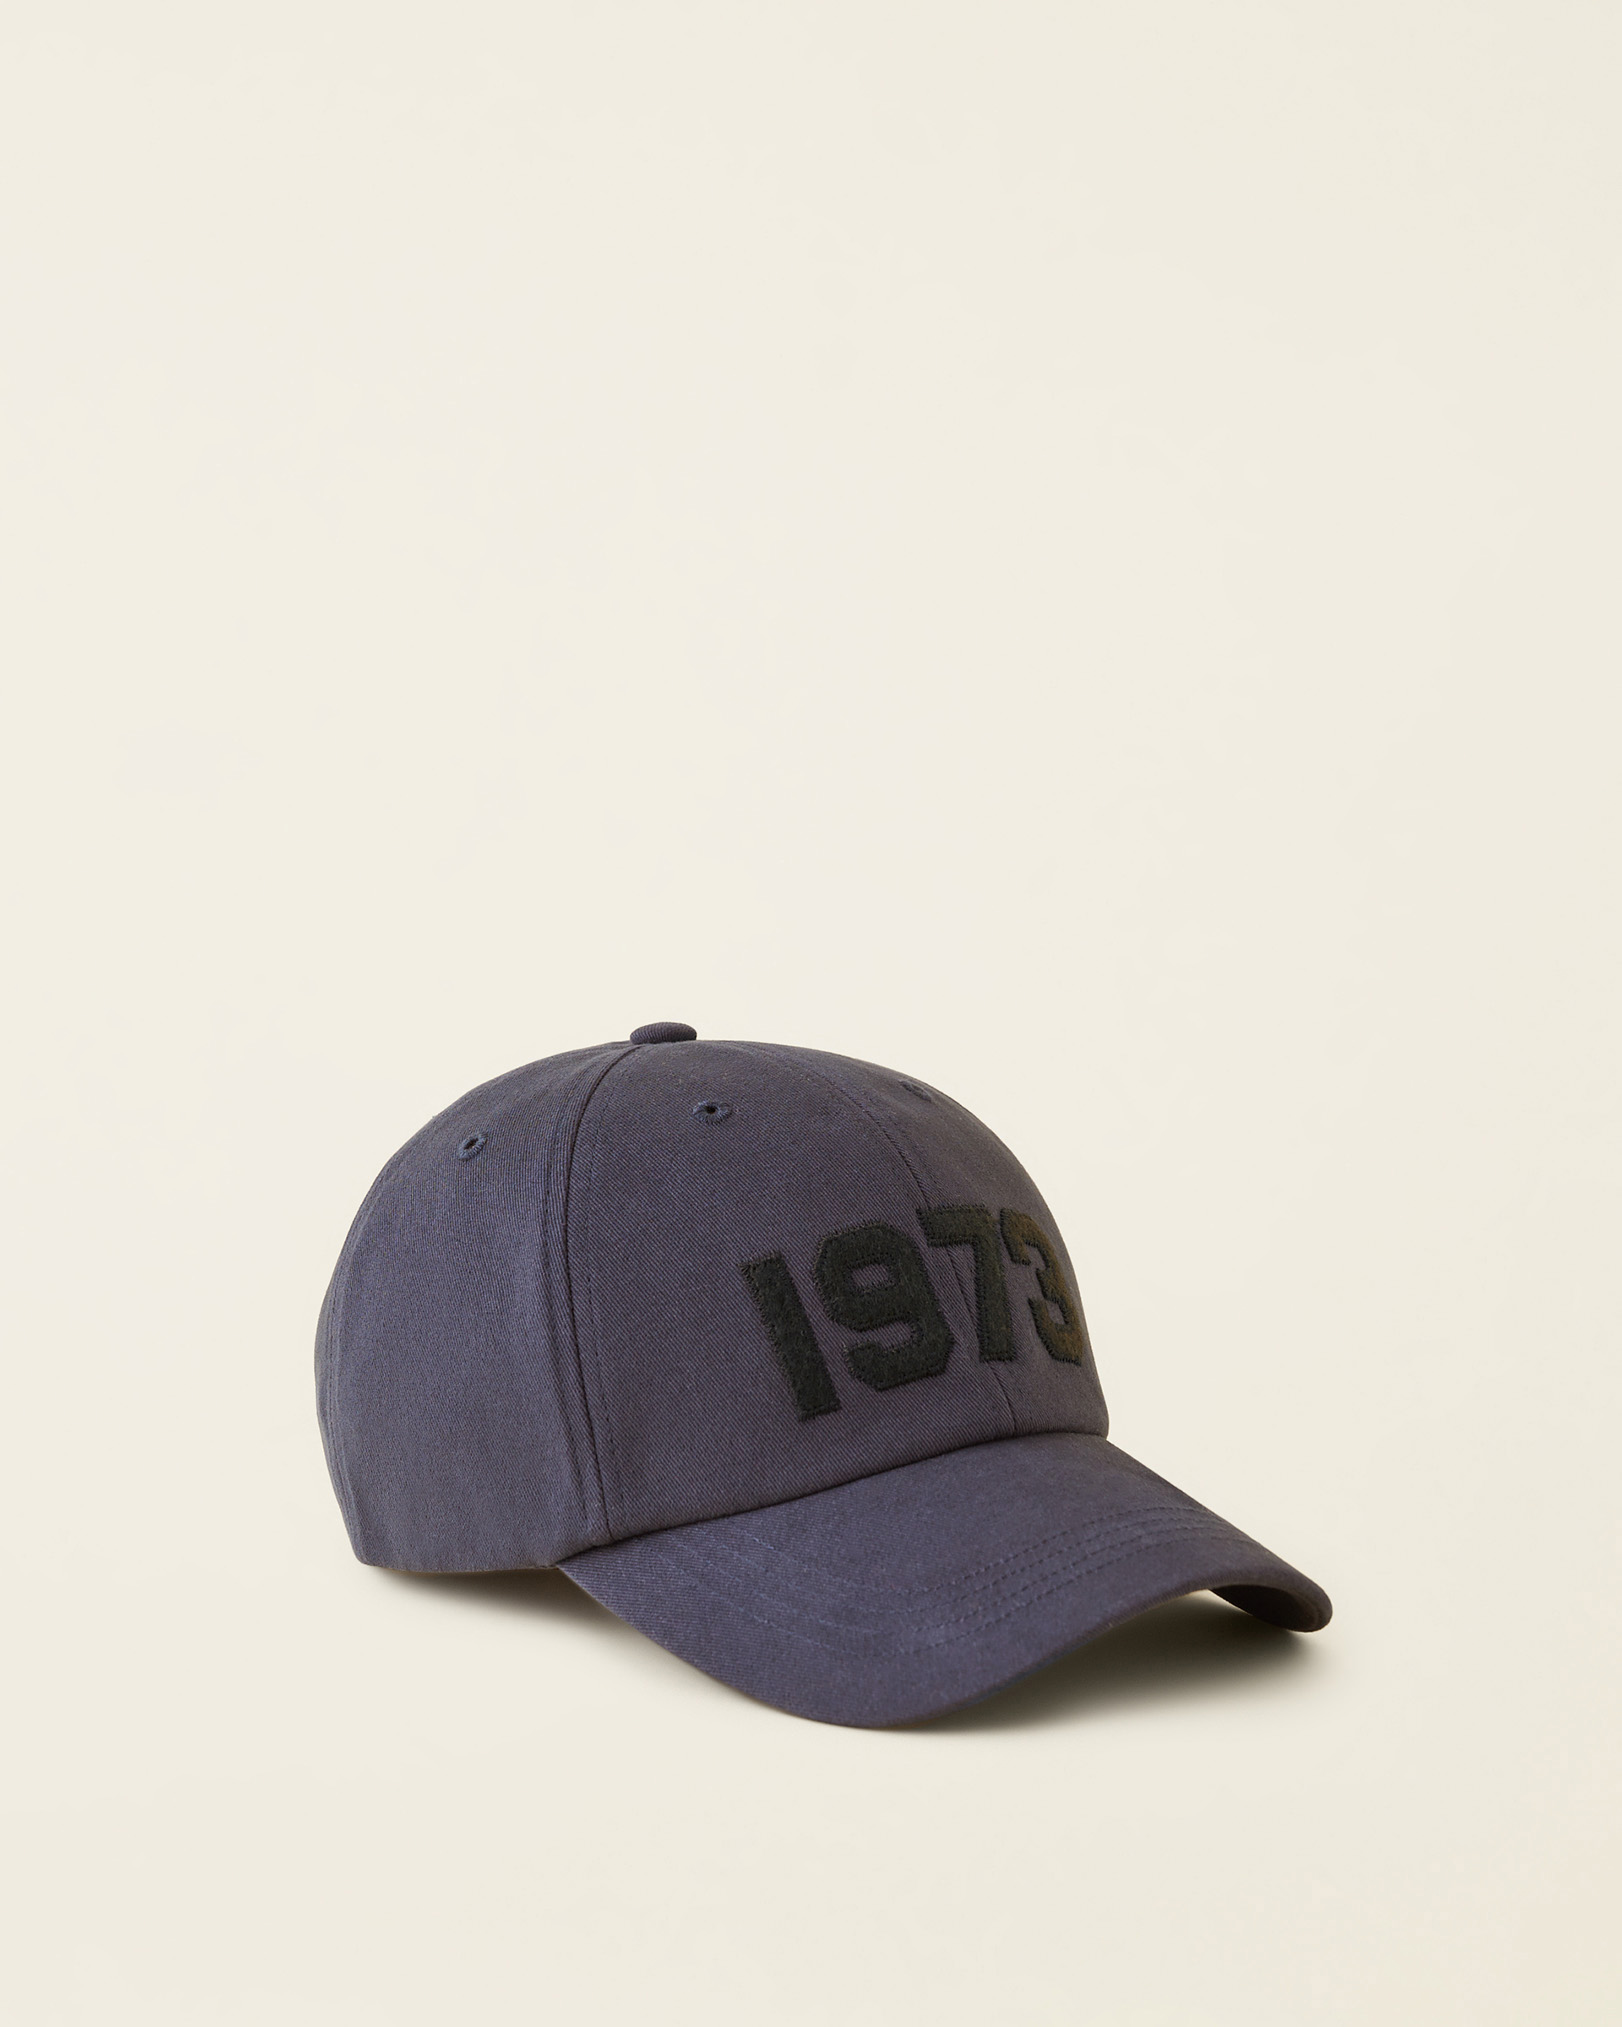 Roots 1973 Baseball Cap Hat in Graphite